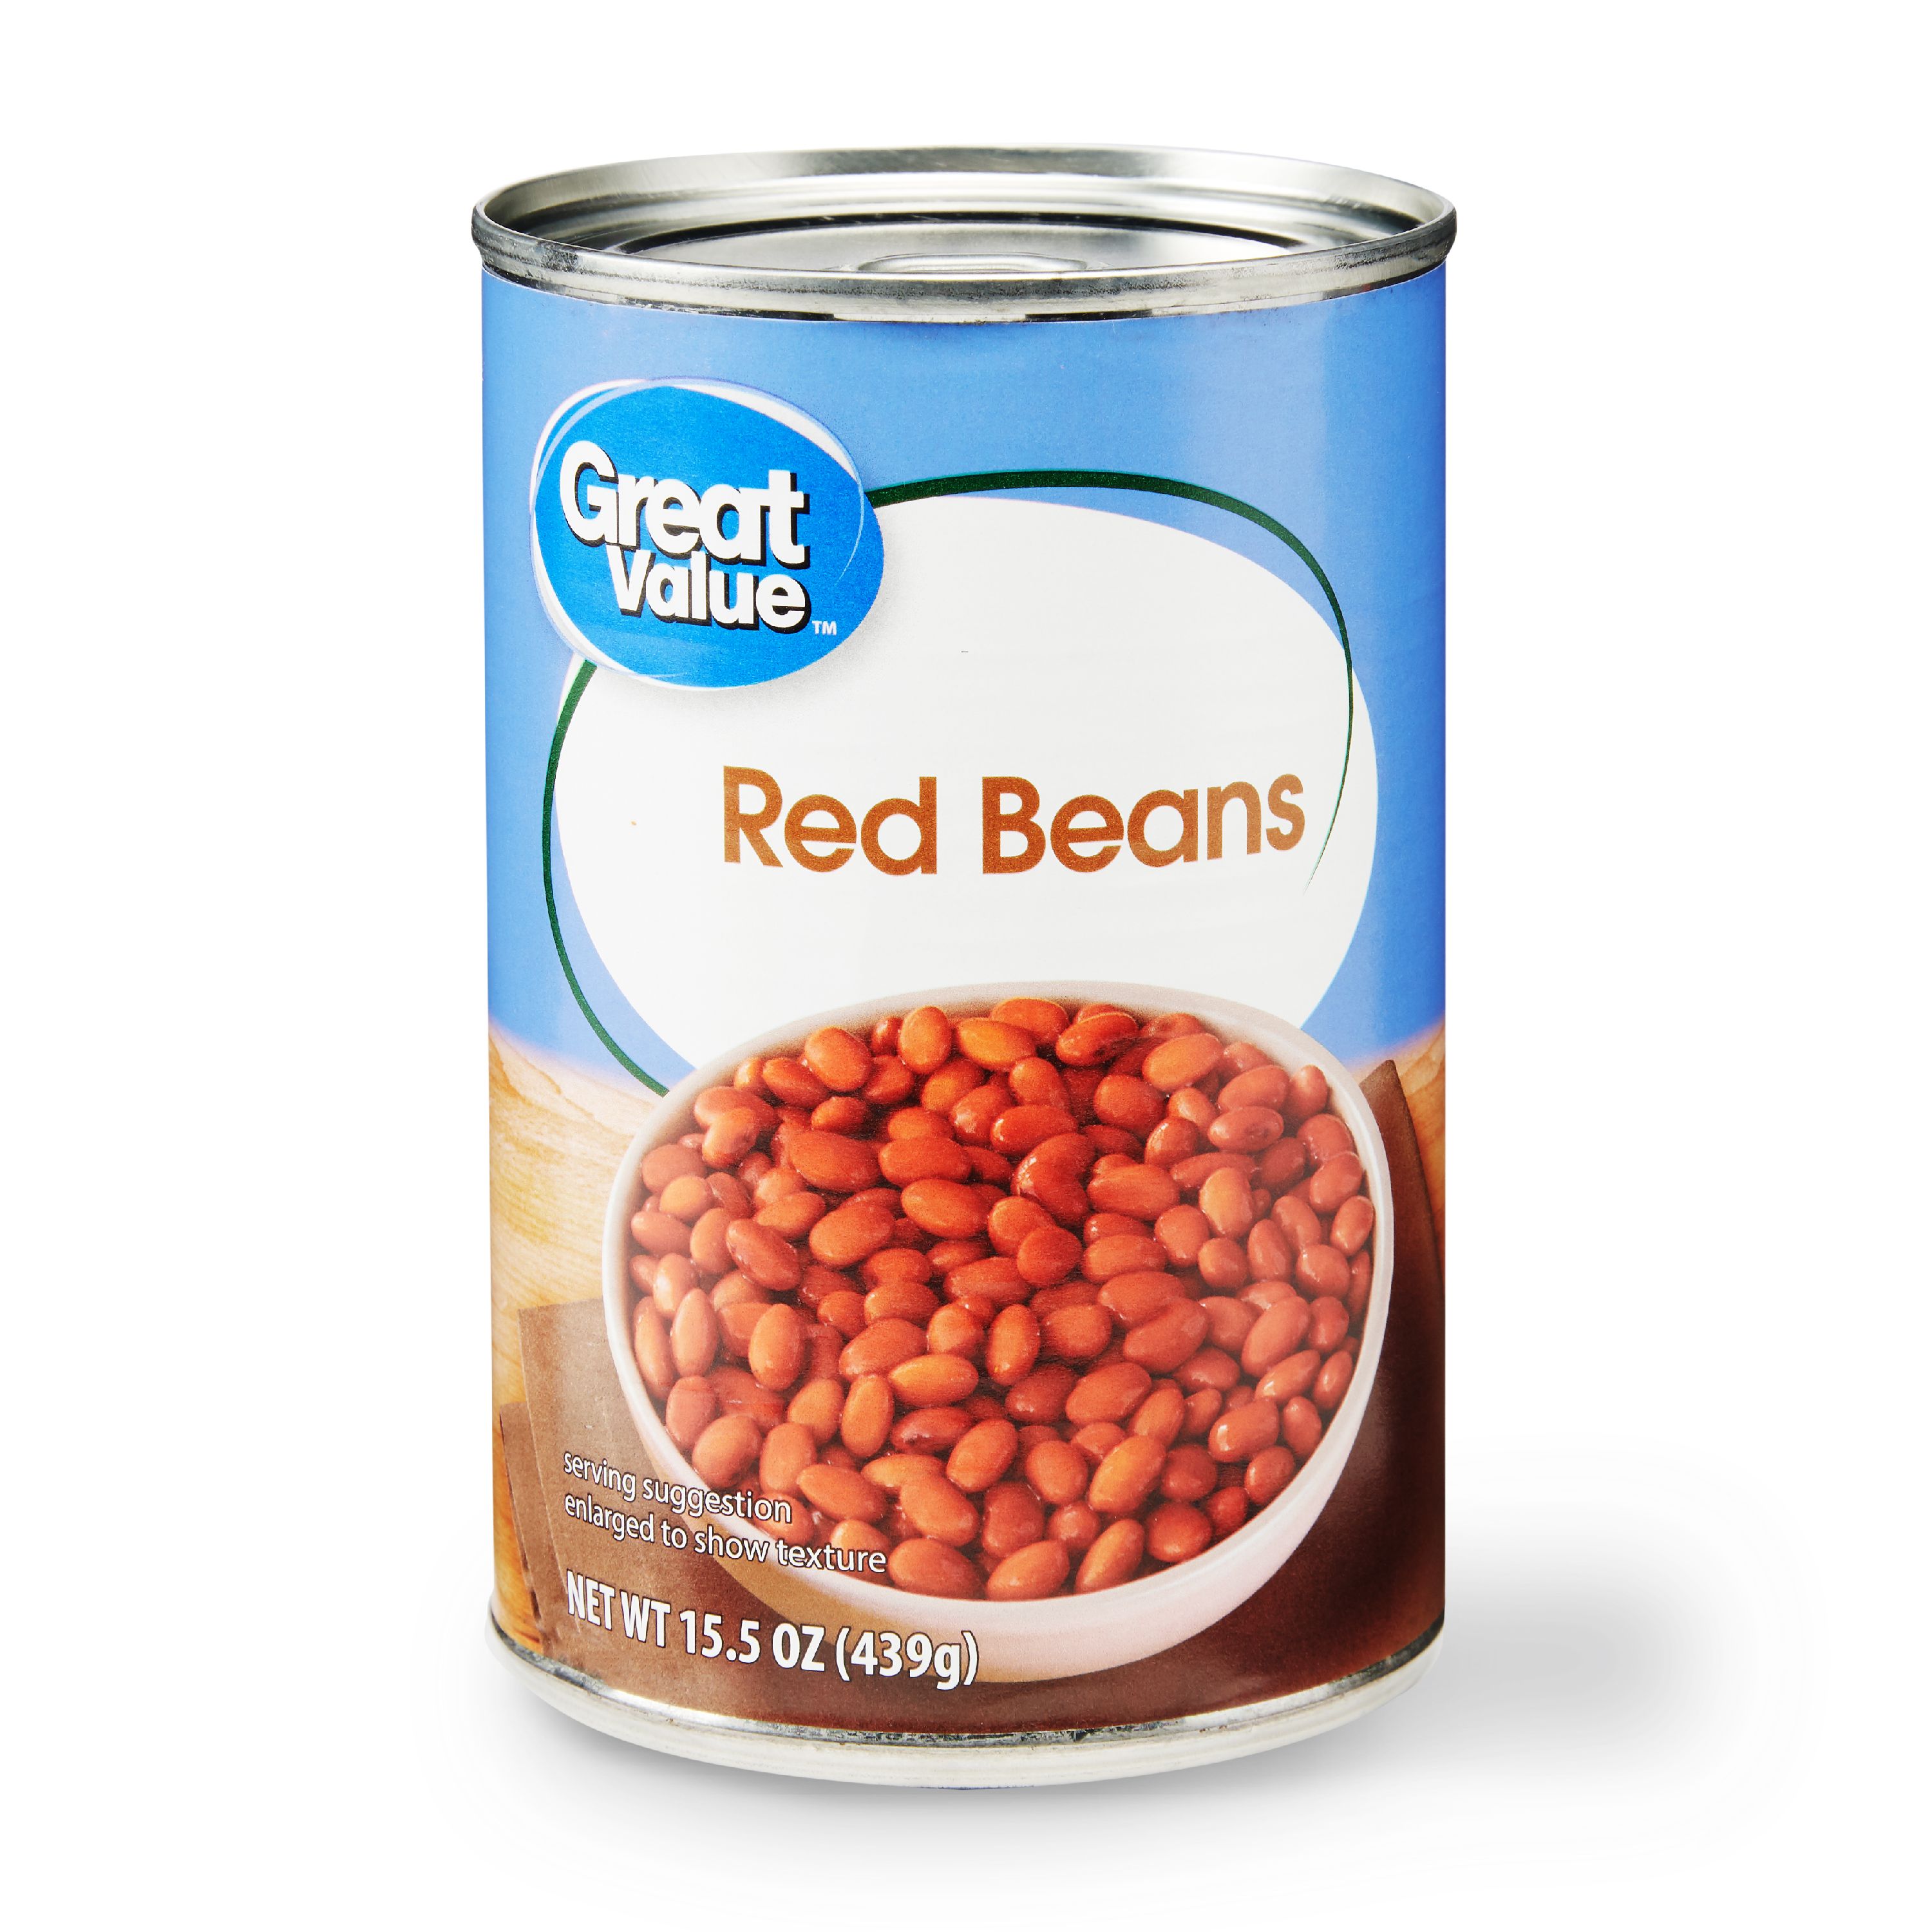 (4 Pack) Great Value Red Beans, 15.5 Oz Image